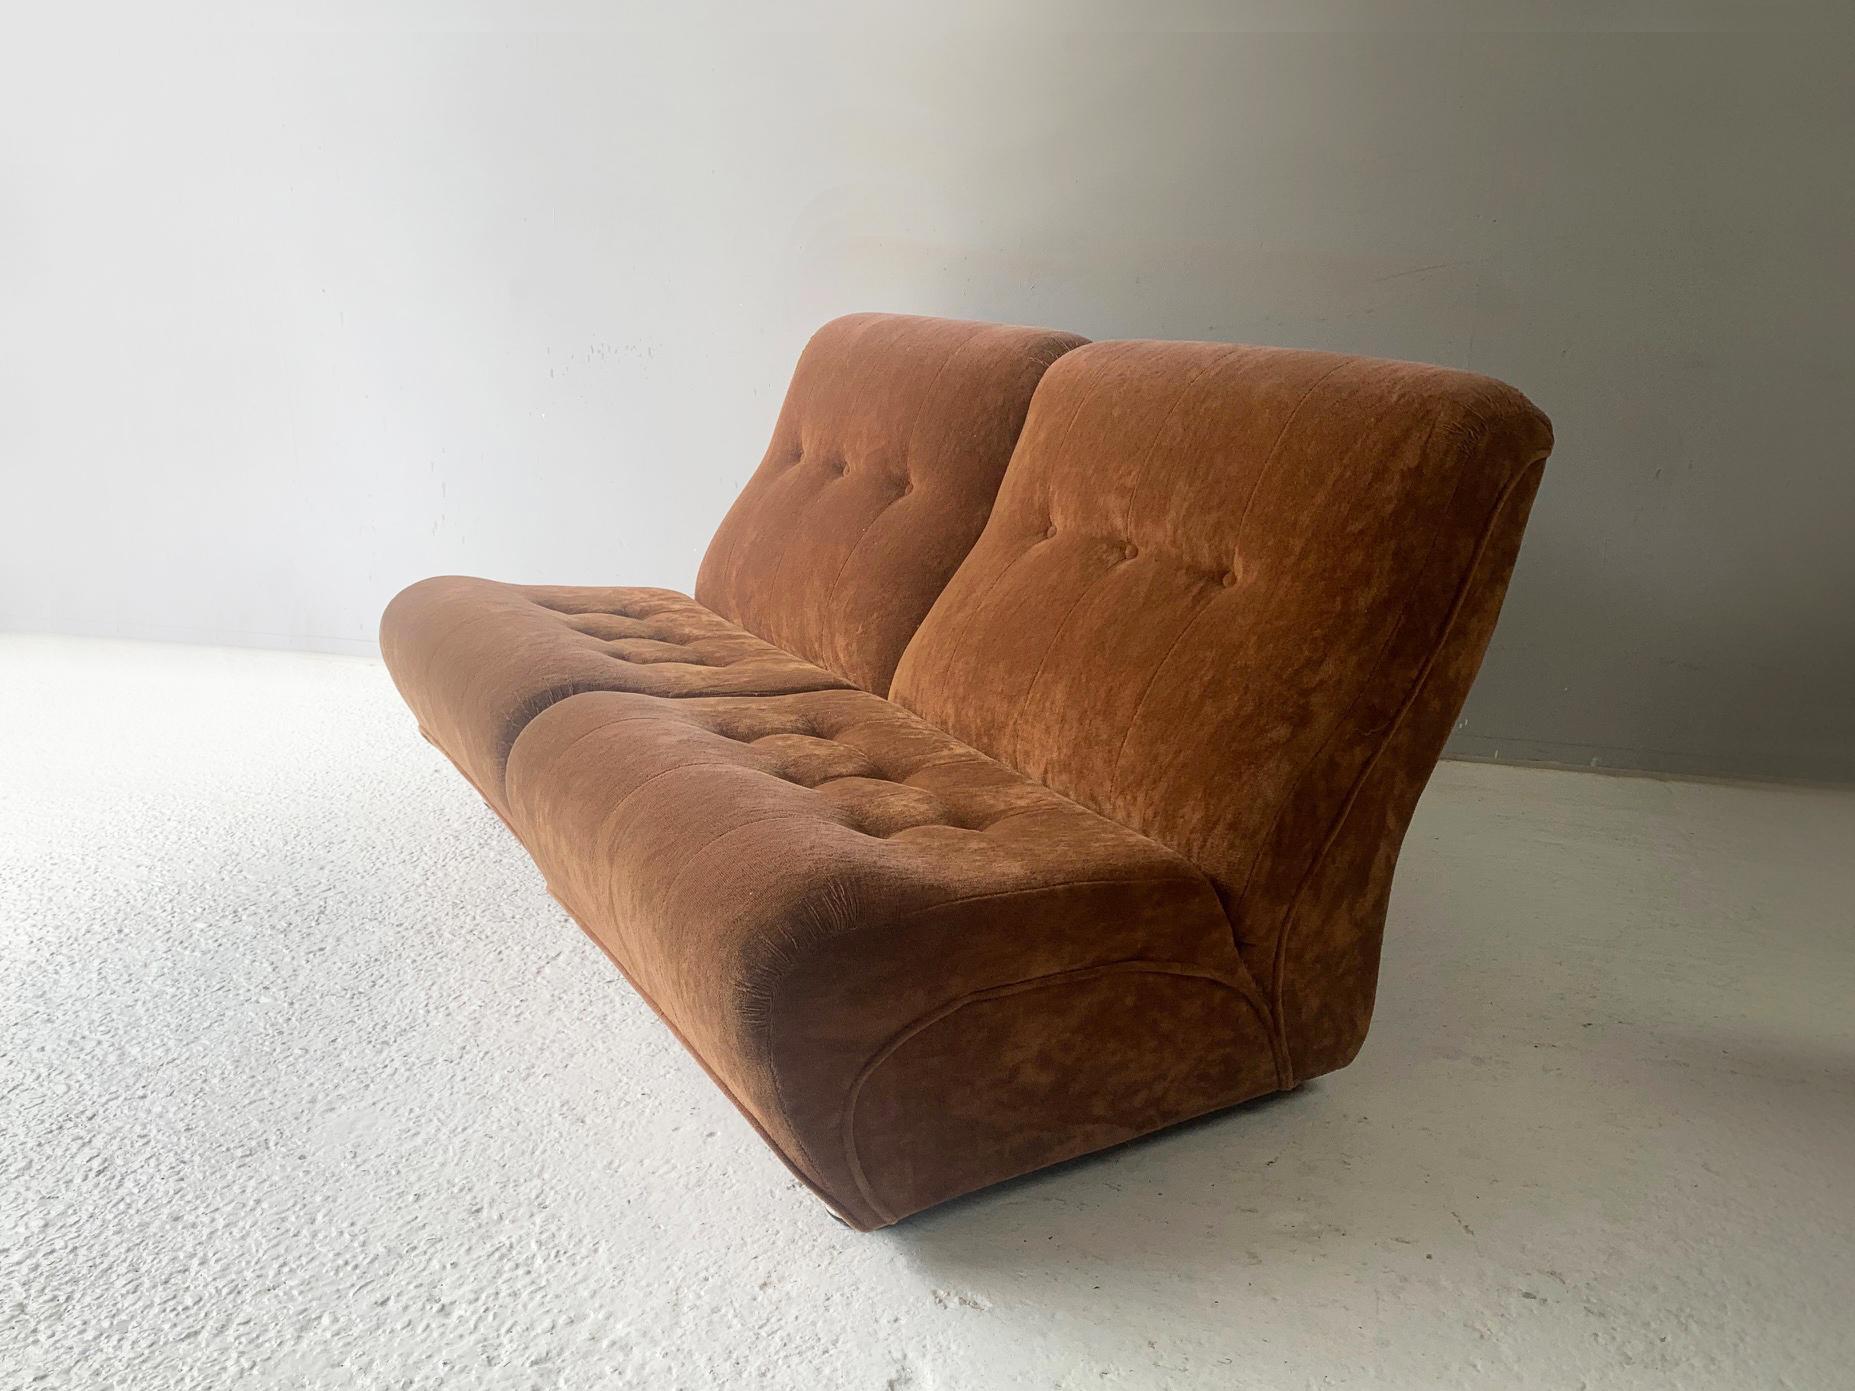 The price listed is for 1 sofa (2 armchairs).
Happy to sell individually. Price on request.

Pair of armless sofas that sit together to make a sofa, or can be used individually. Produced by Schreiber furniture in the 1960’s. The upholstery is